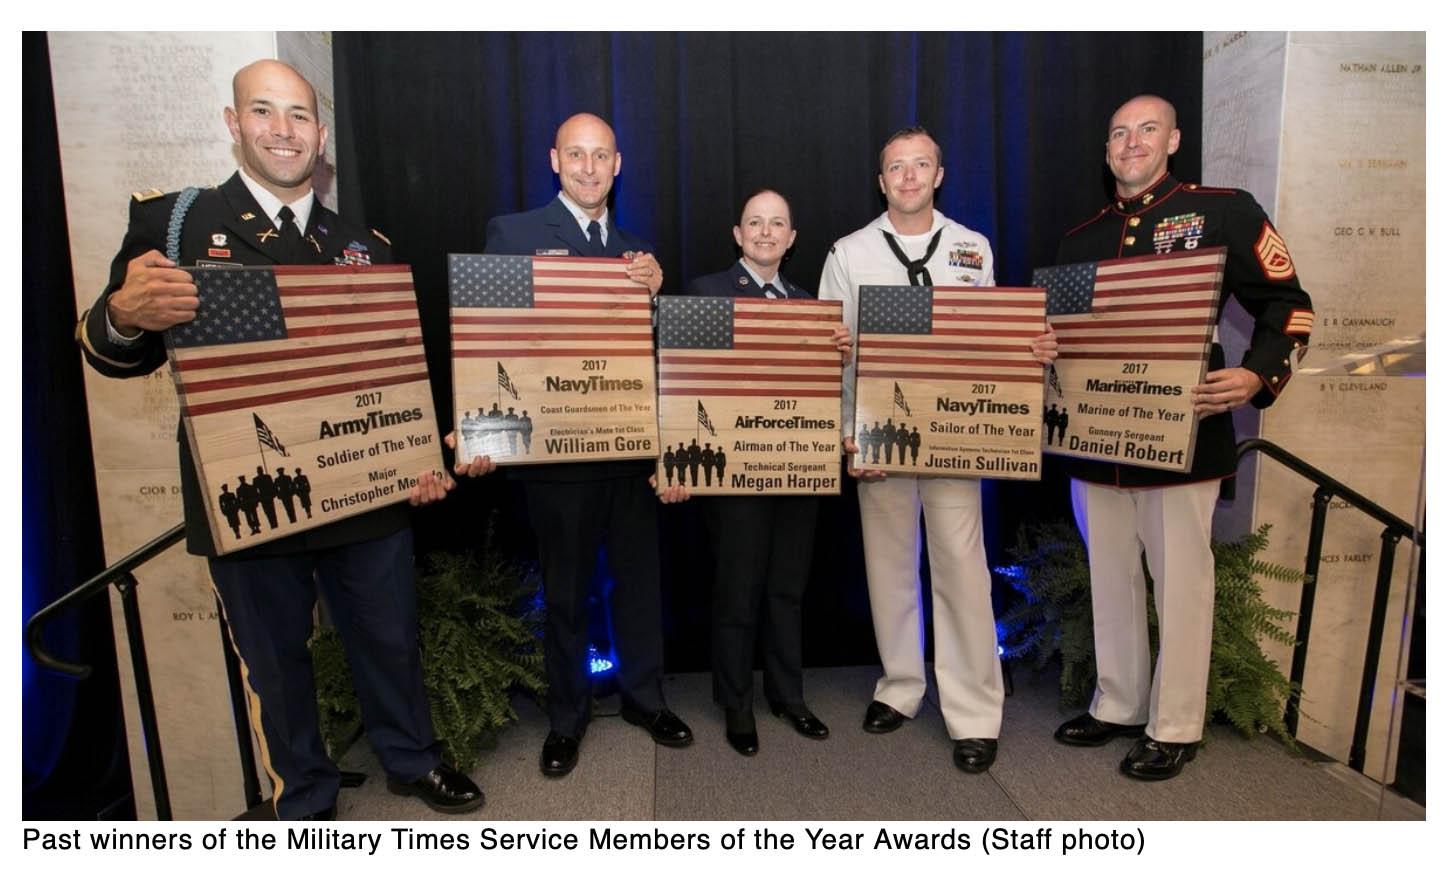  Nominate now for the 2021 Military Times Service Members of the Year Awards